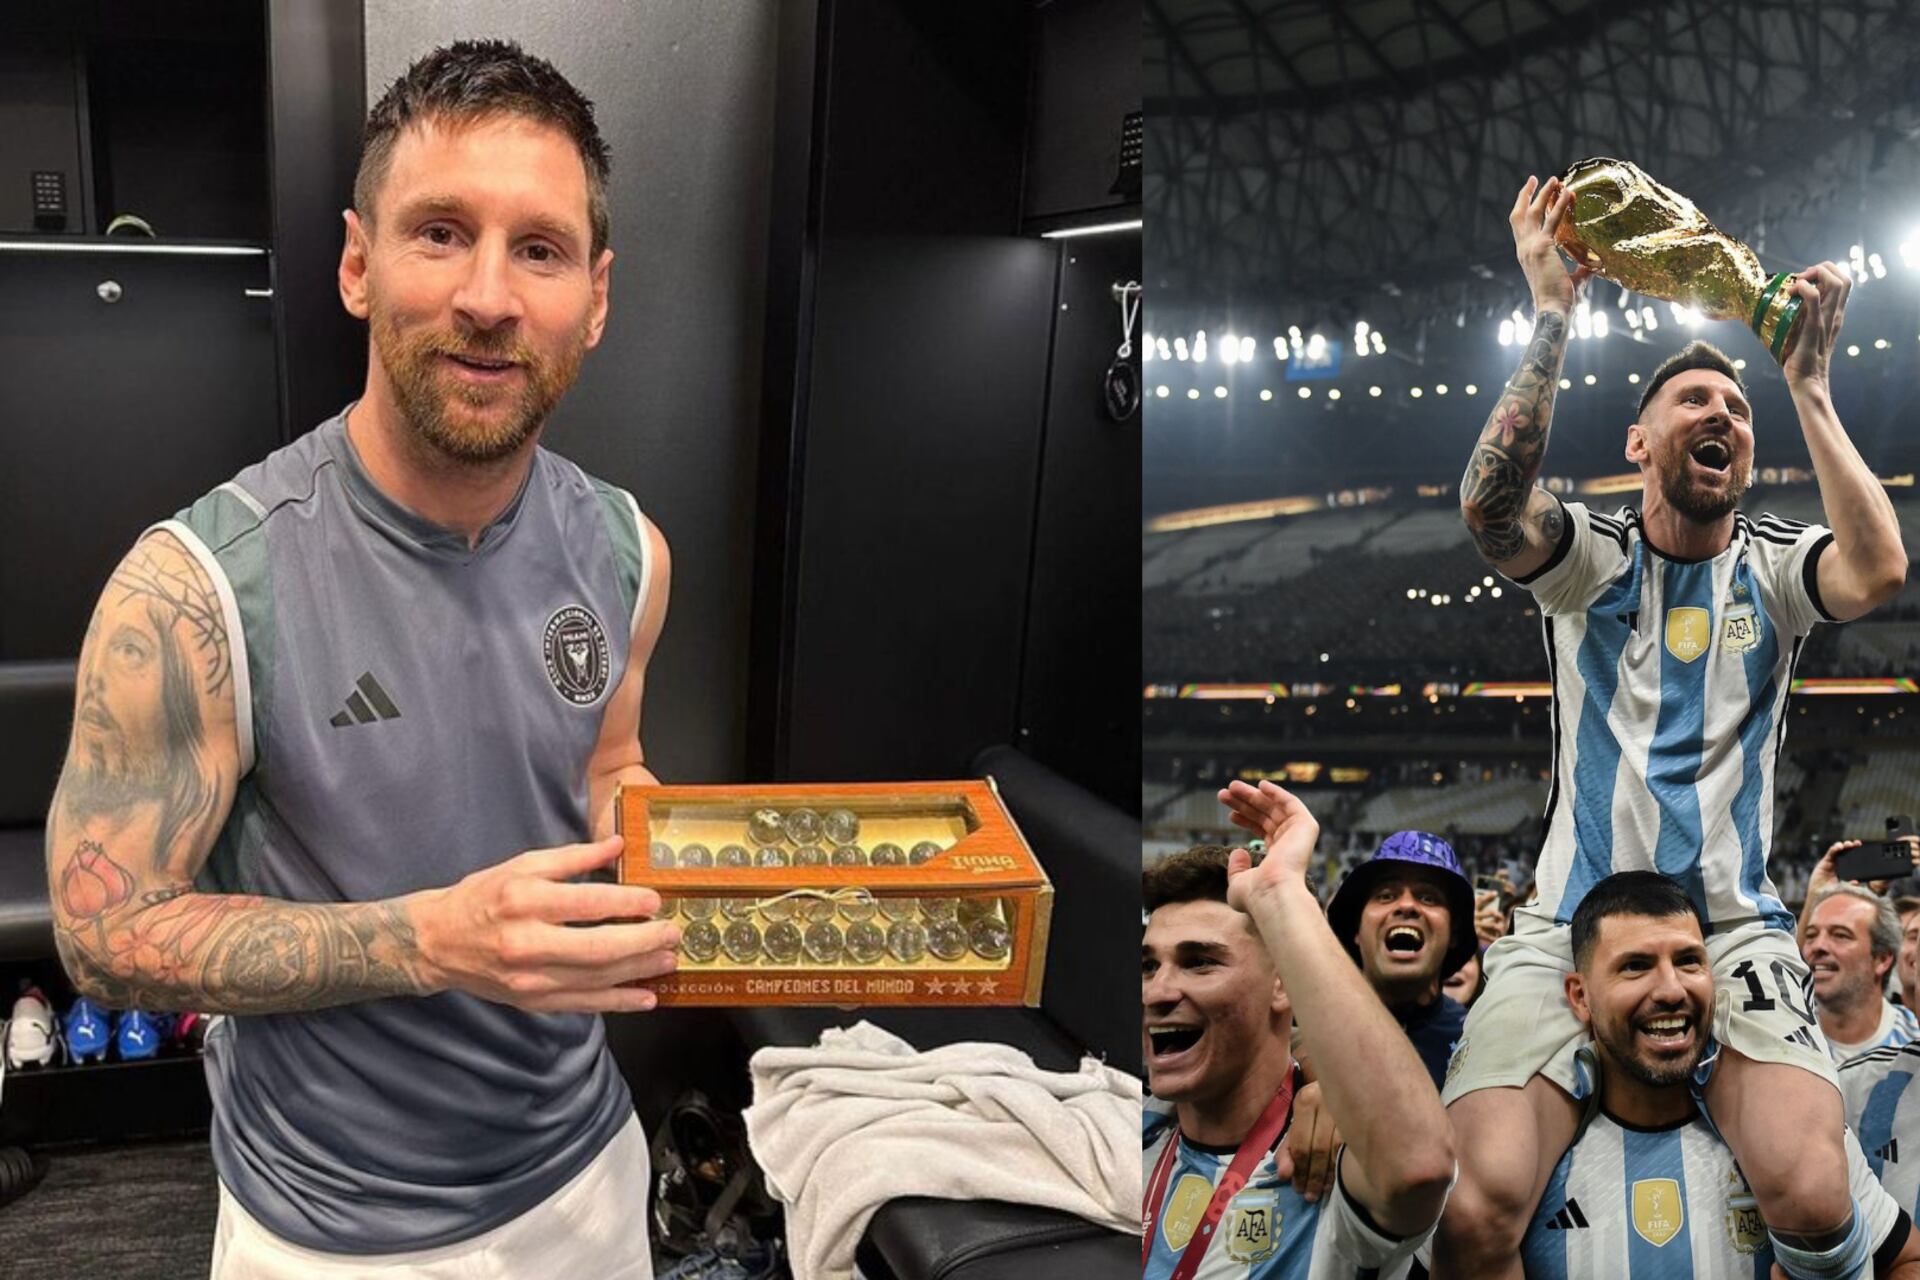 The newest gift Lionel Messi received for winning the World Cup with Argentina